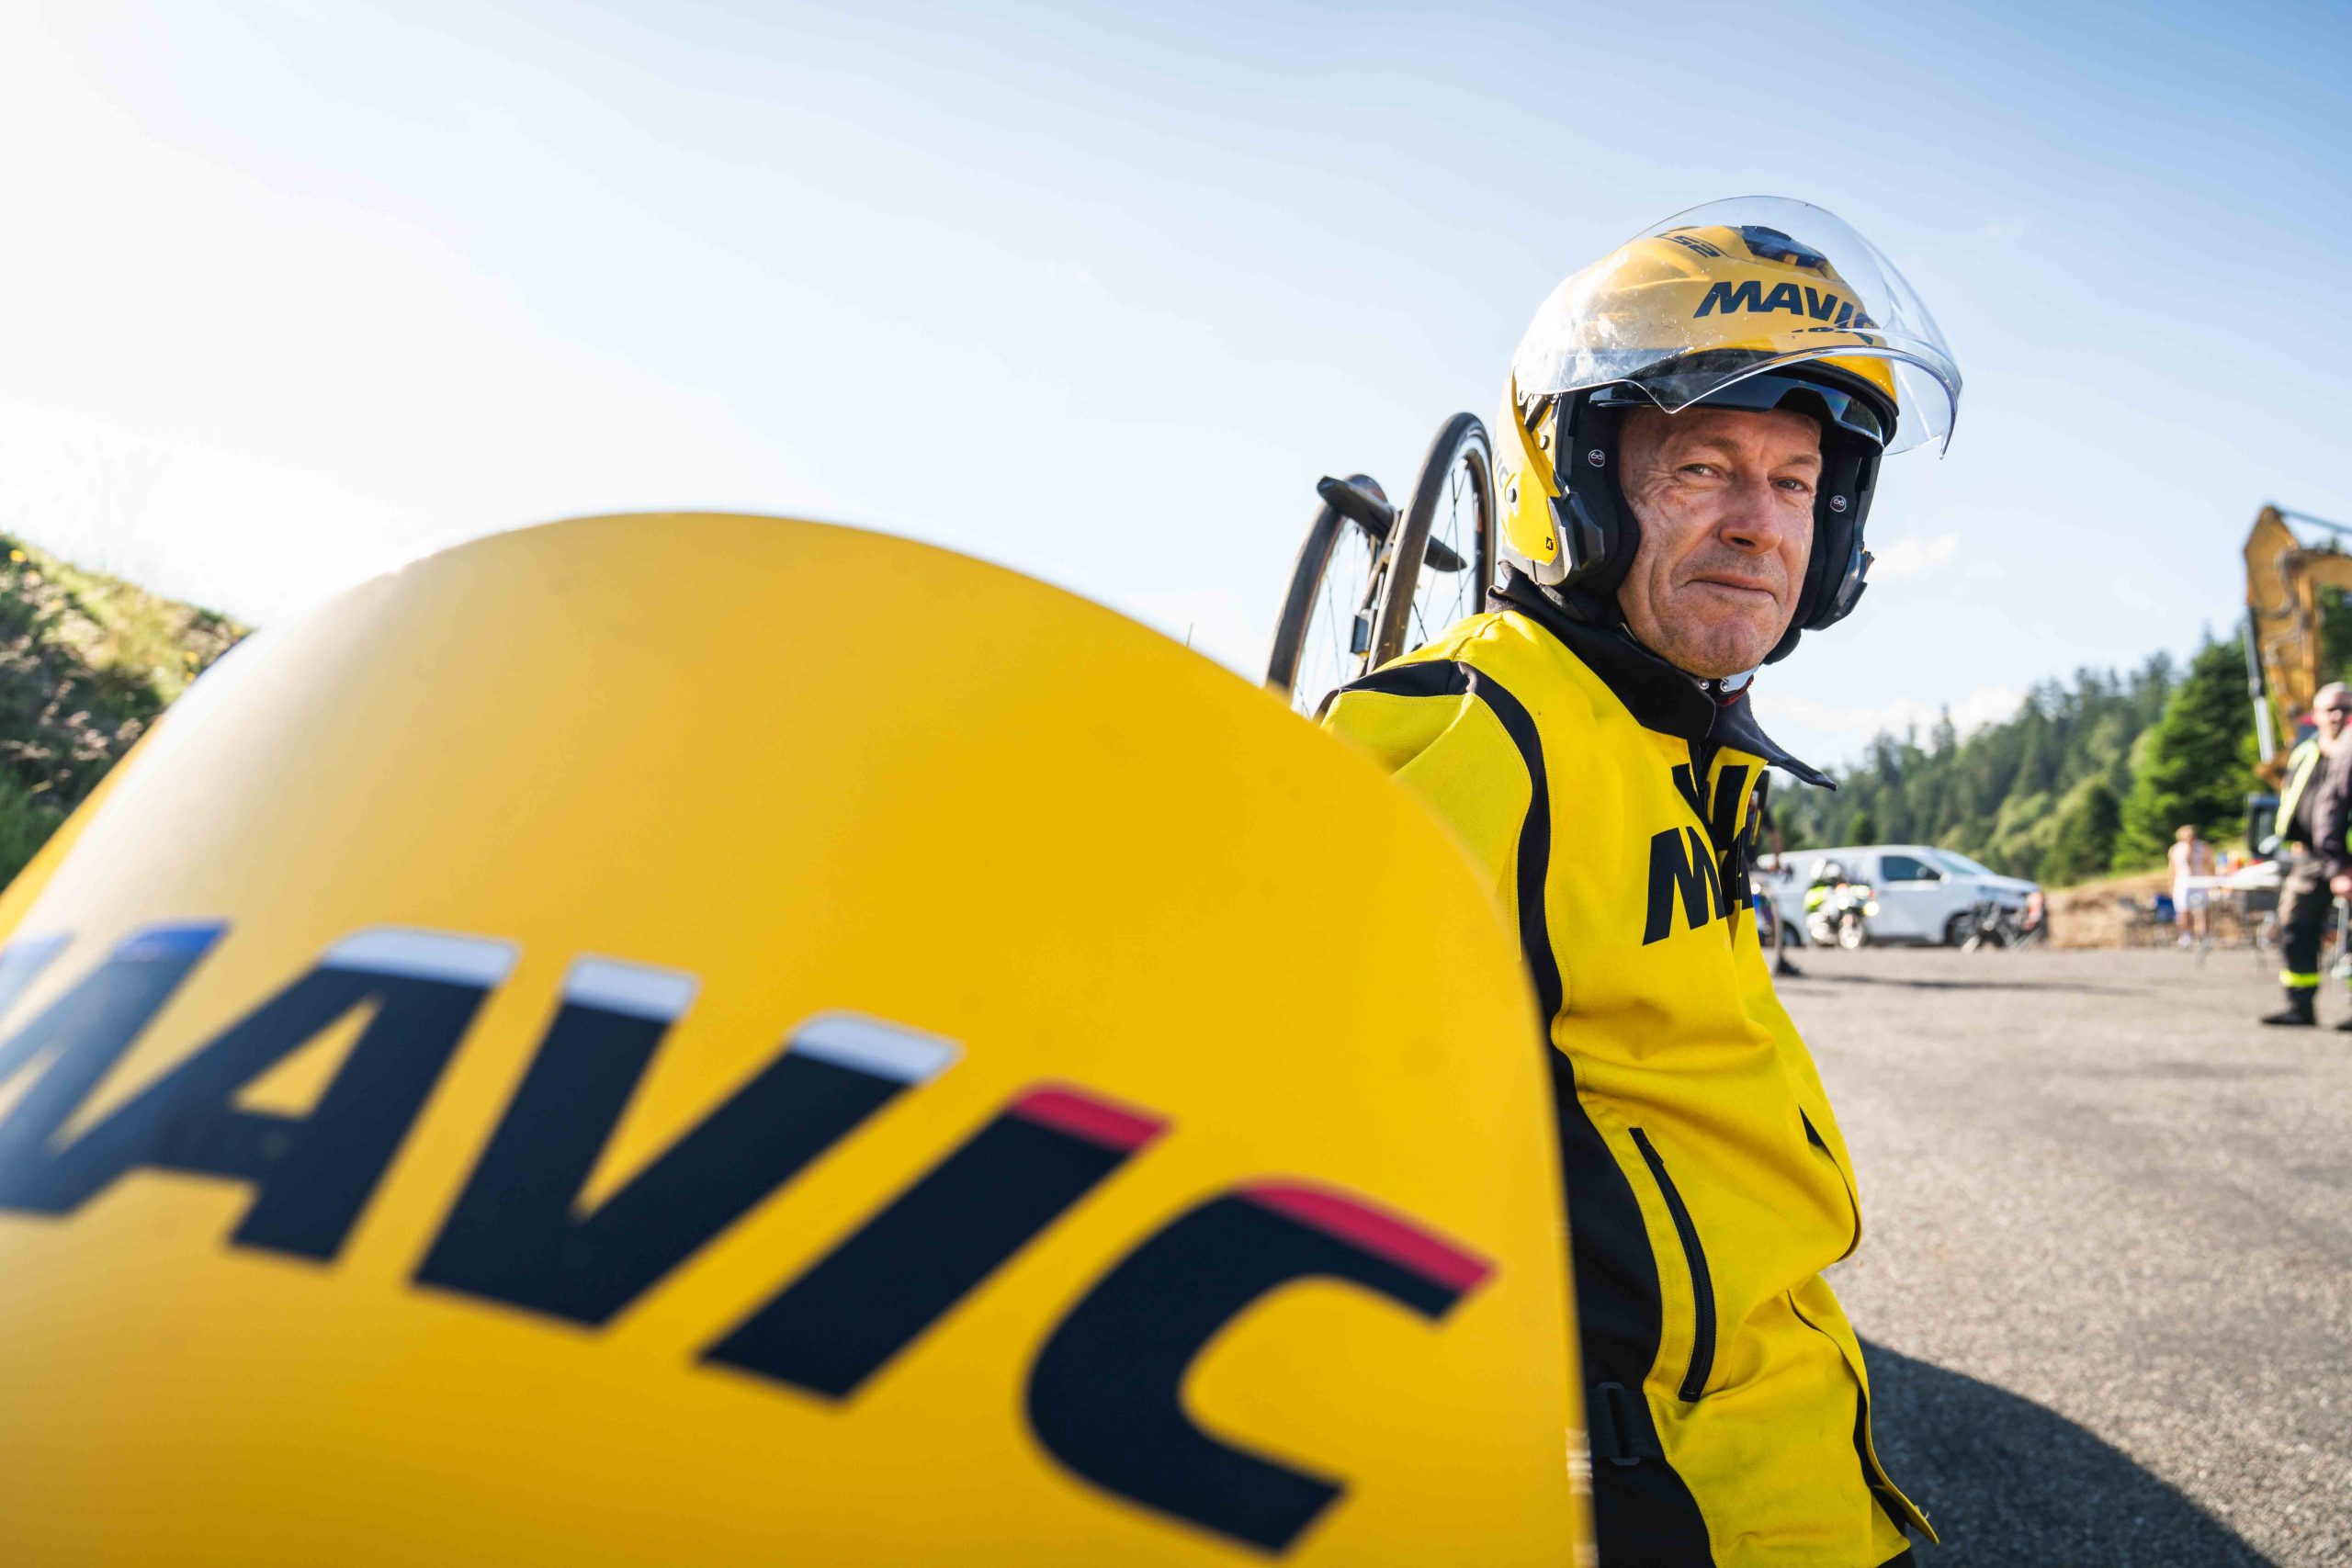 Haute Route and Mavic Renew Sponsorship Agreement under New Ownership